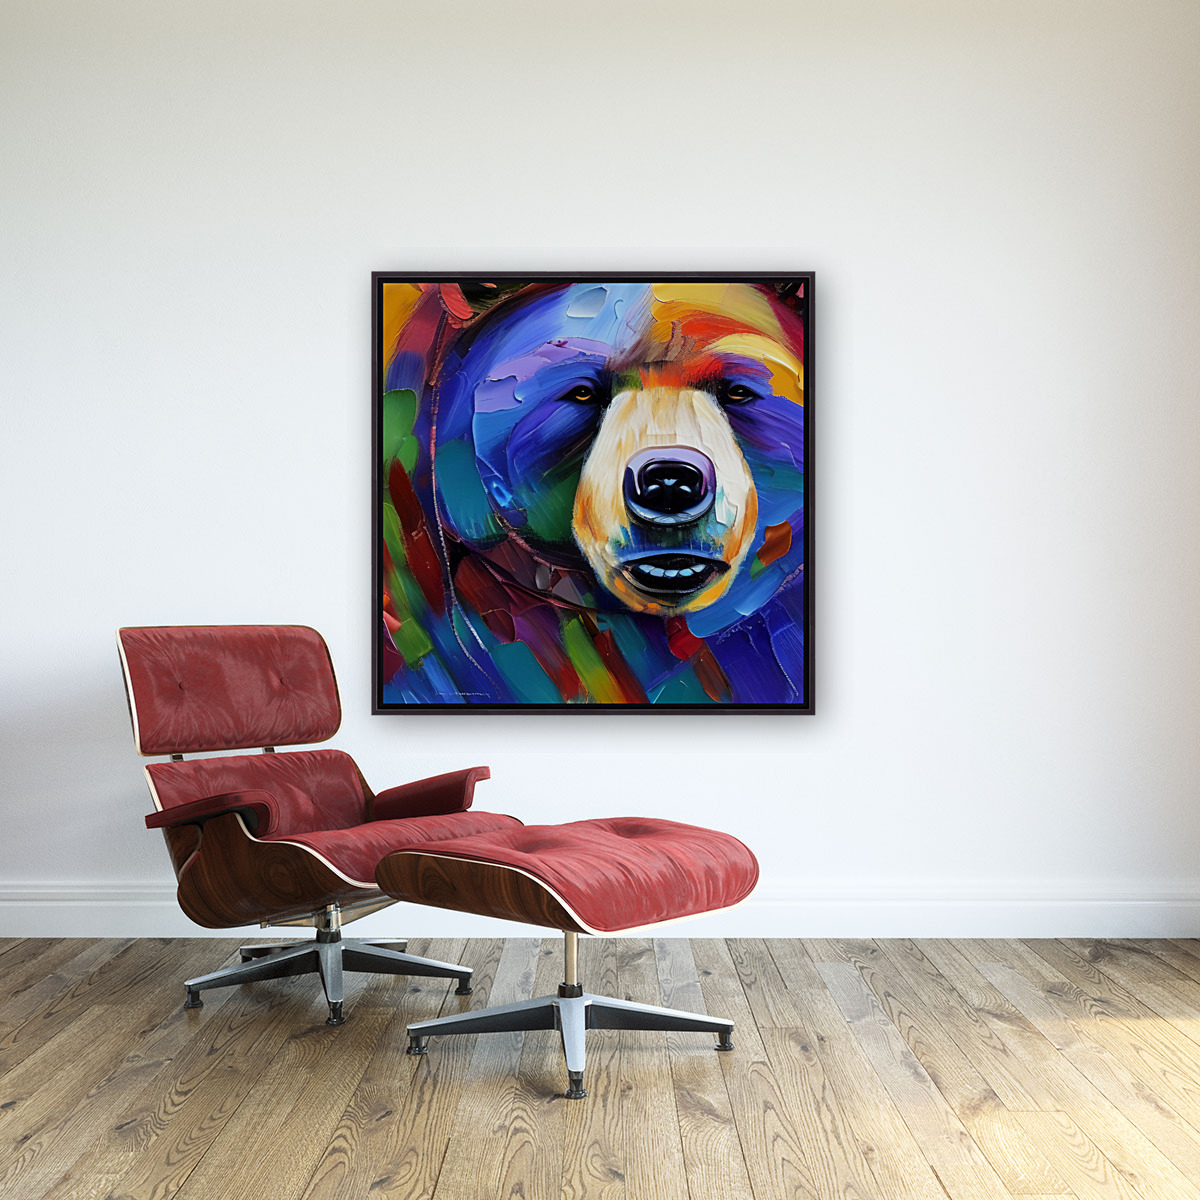 A striking piece of abstract lion art, where the intricate play of colors and shapes creates a compelling image of a lion. The artwork encapsulates the strength and majesty of the lion in an imaginative, abstract style.